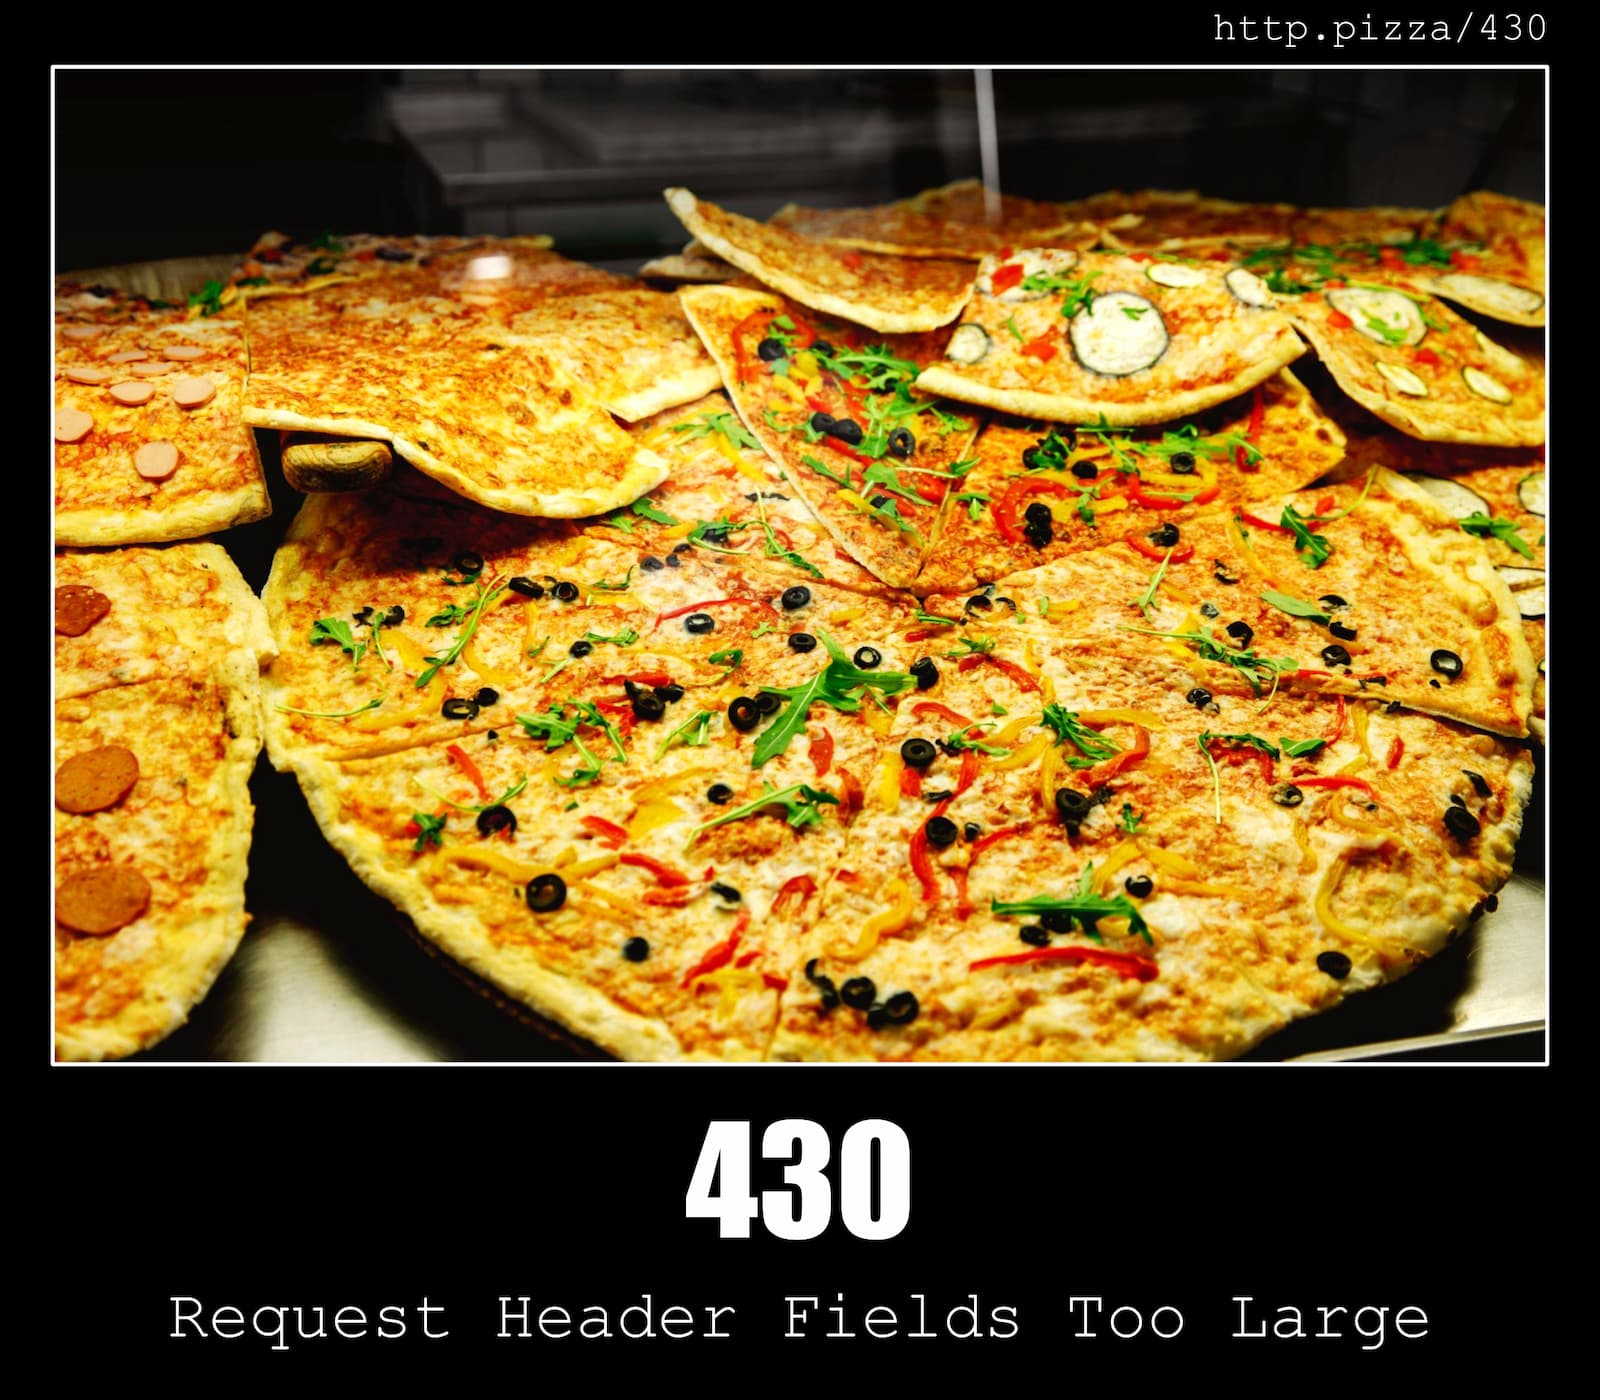 HTTP Status Code 430 Request Header Fields Too Large & Pizzas